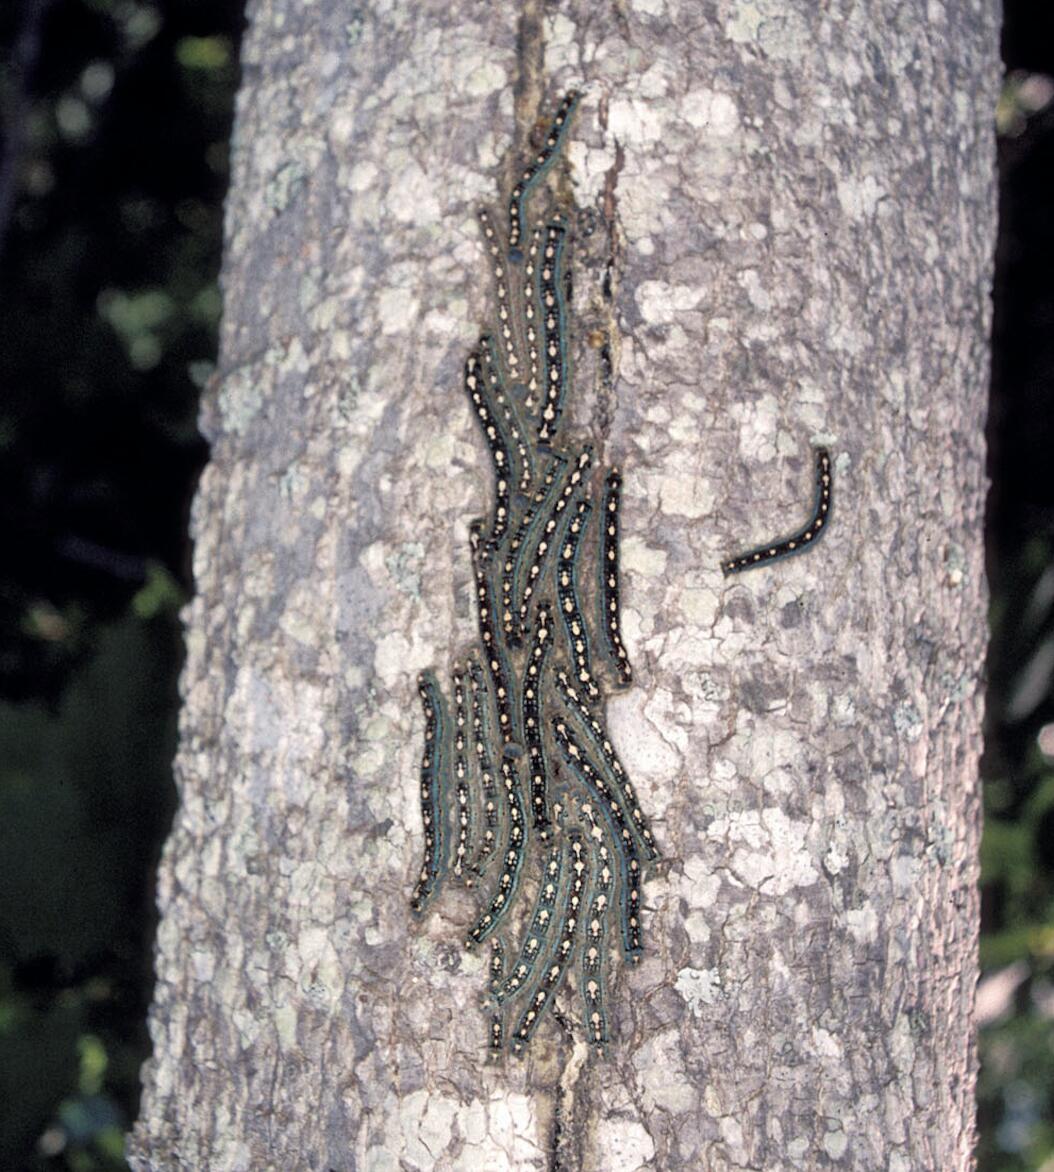 Collection of forest tent caterpillars.  This insect does not make a tent-like structure but instead spins a silken platform on which caterpillars gather when not feeding. Photo credit Bugwood.org